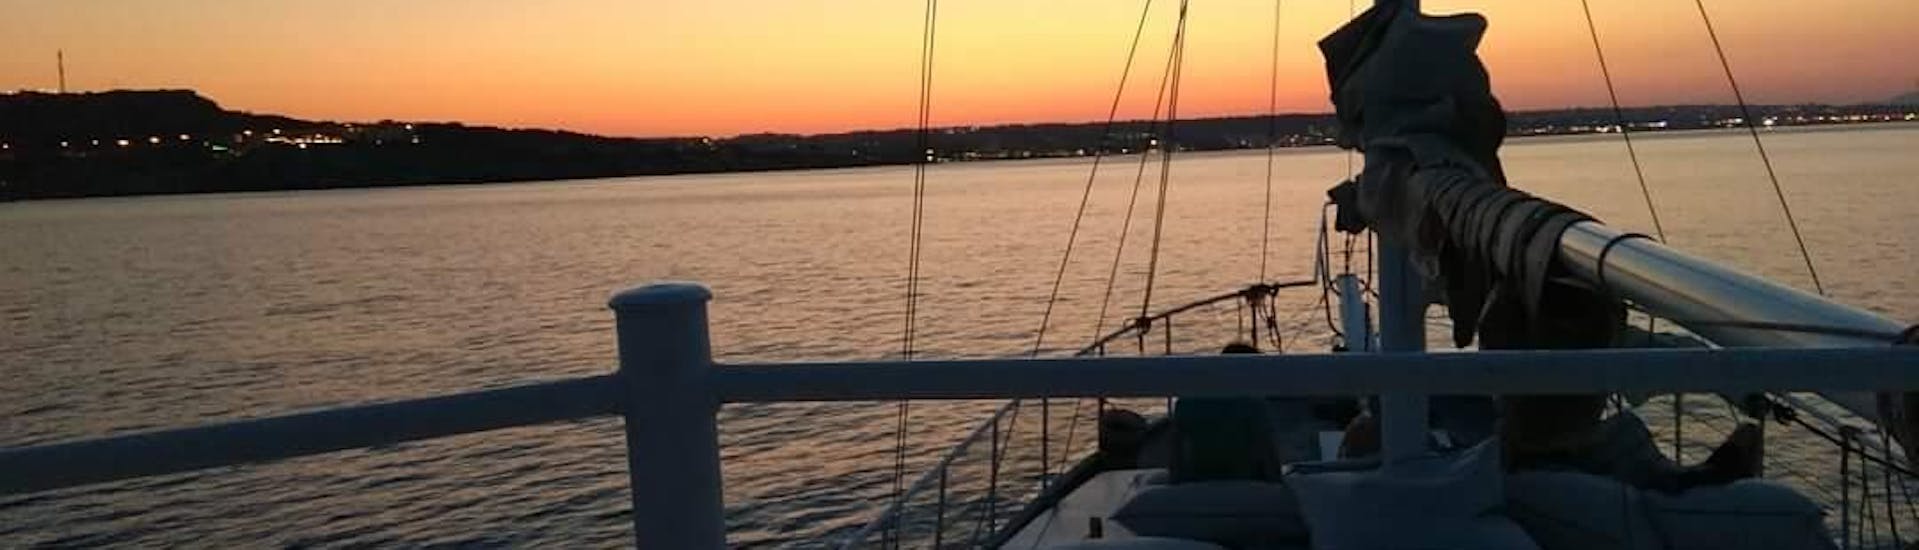 Picture of the Sunset during a Boat Trip along the East Coast of Rhodes with Dinner with Romantika Rhodes Day Cruise.